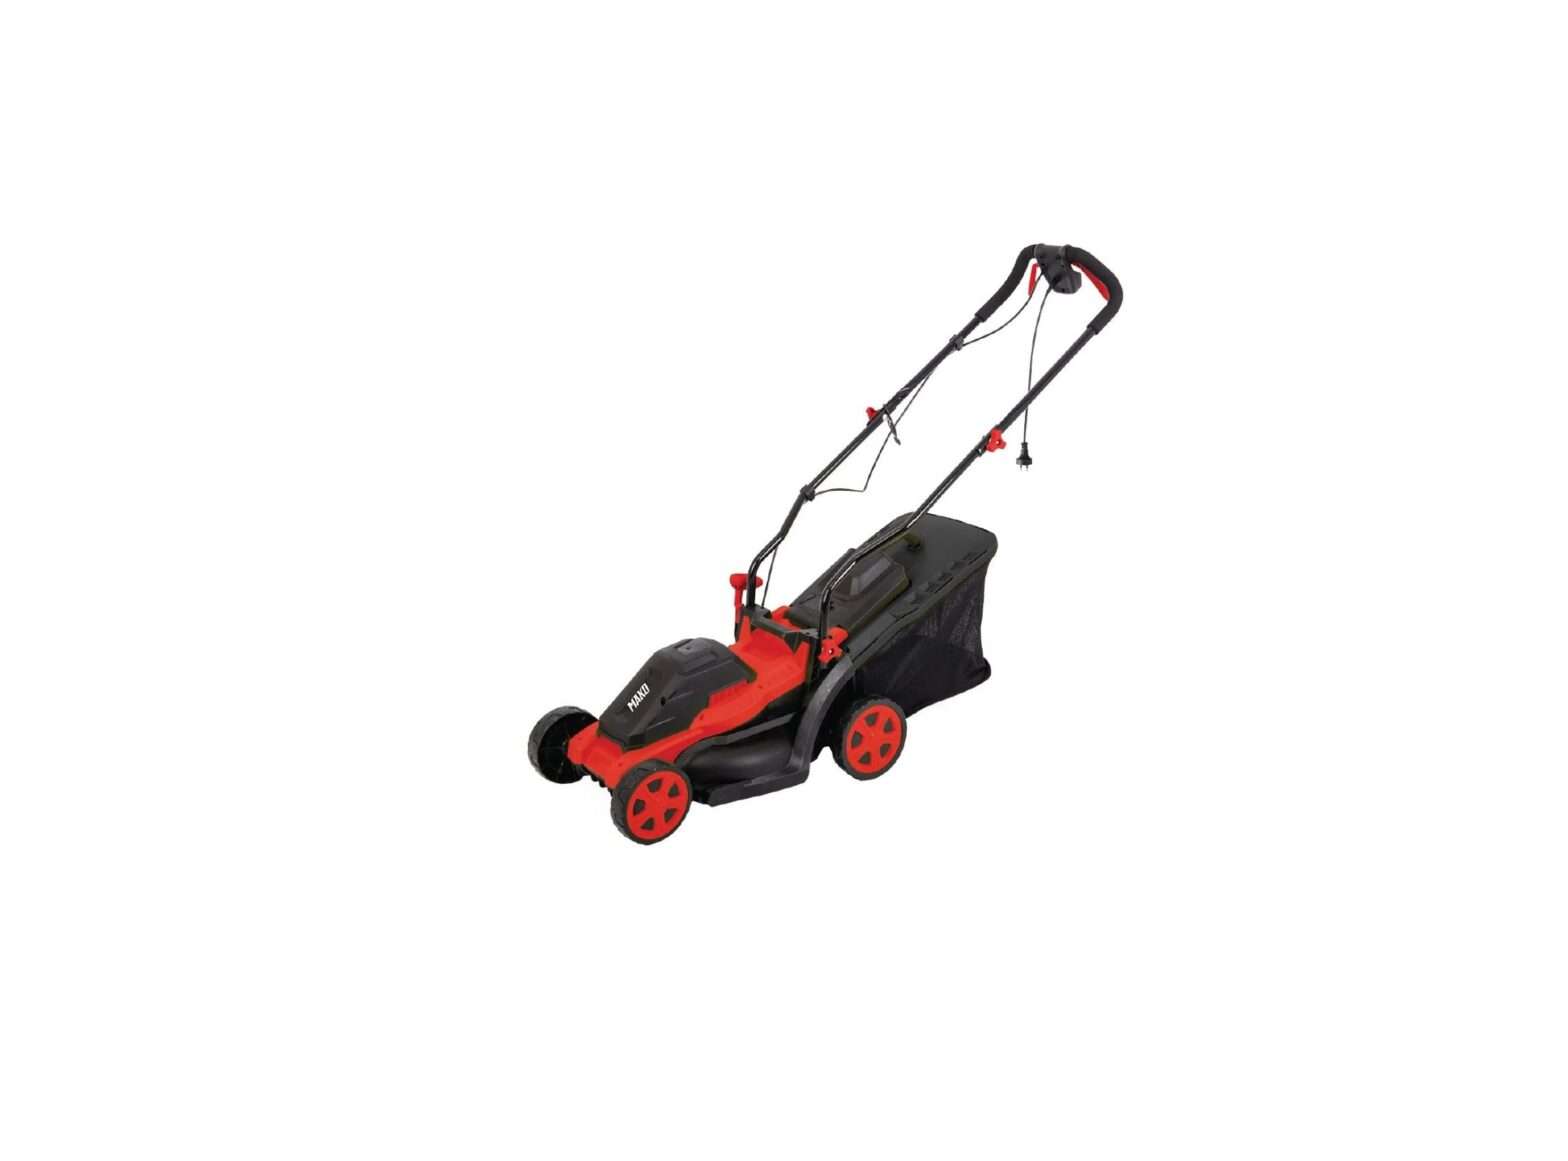 MAKO SROM1269 1400W Electric Lawn Mower Instruction Manual - Featured image